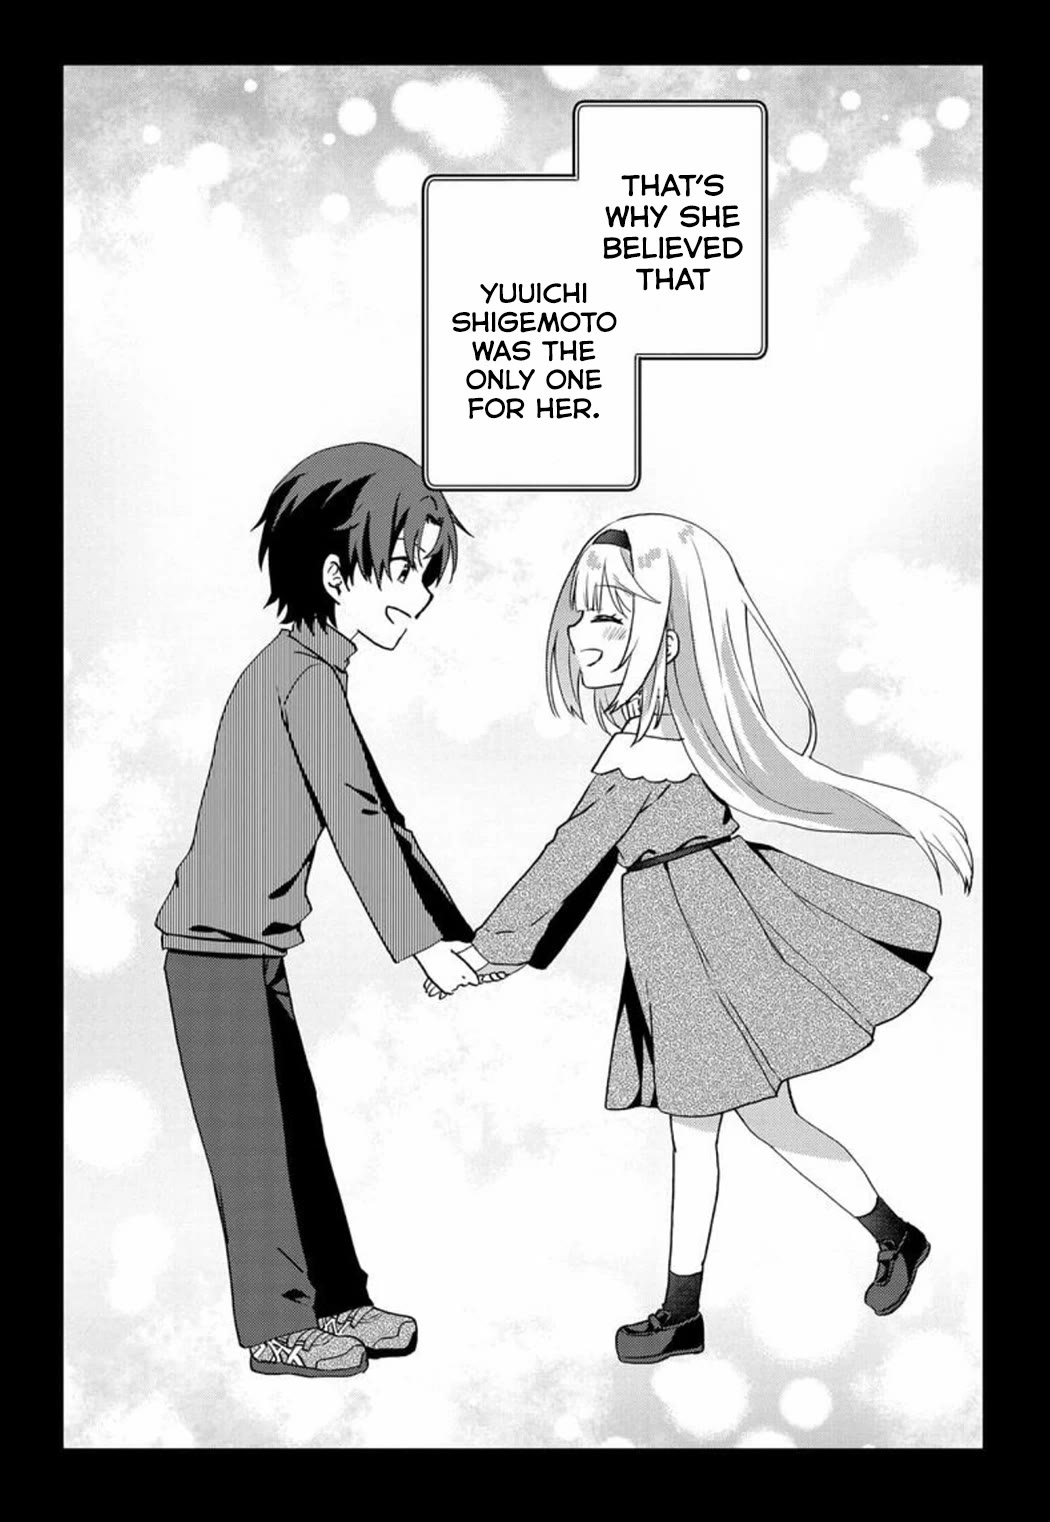 Since I’Ve Entered The World Of Romantic Comedy Manga, I’Ll Do My Best To Make The Losing Heroine Happy - chapter 8 - #4